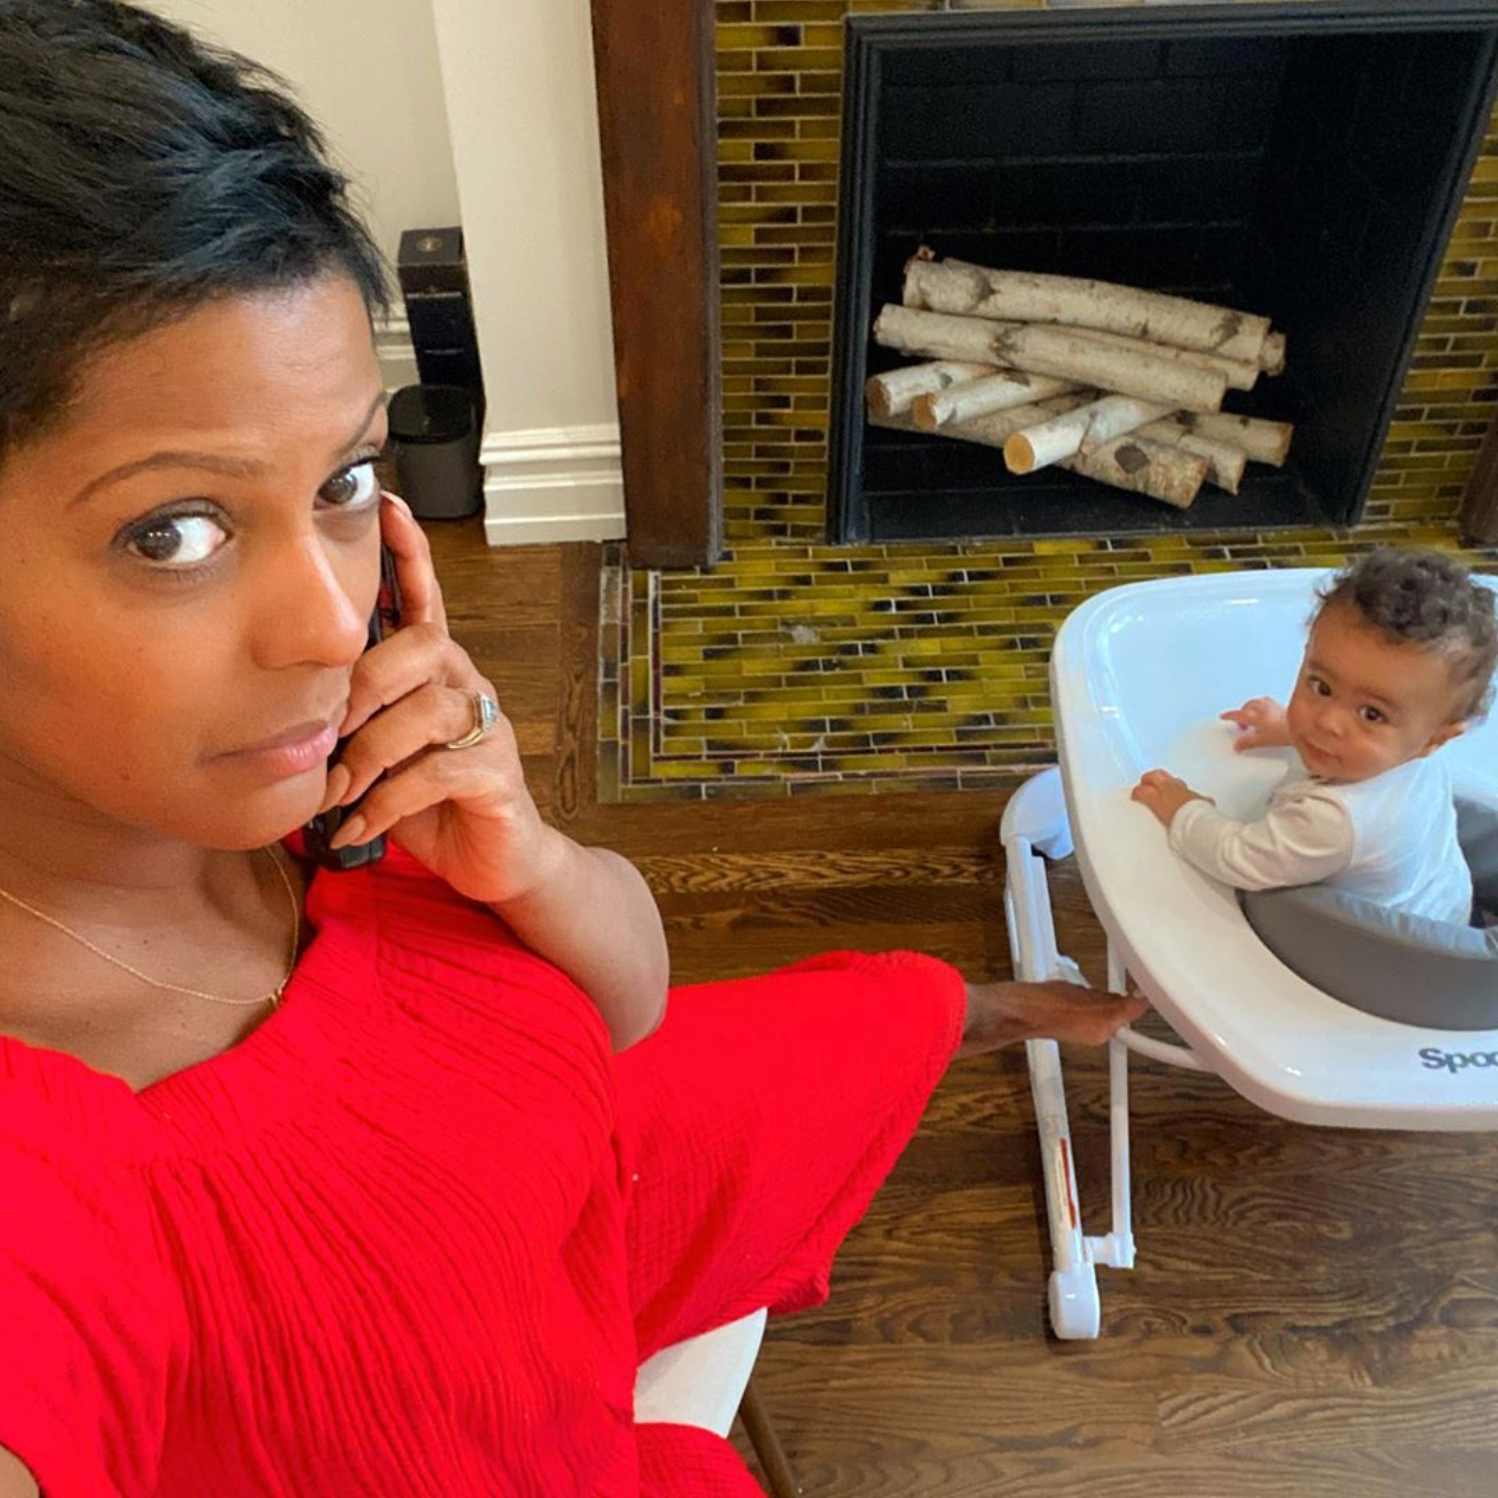 The Great Indoors! These Celeb Families Are Having A Blast Staying Inside